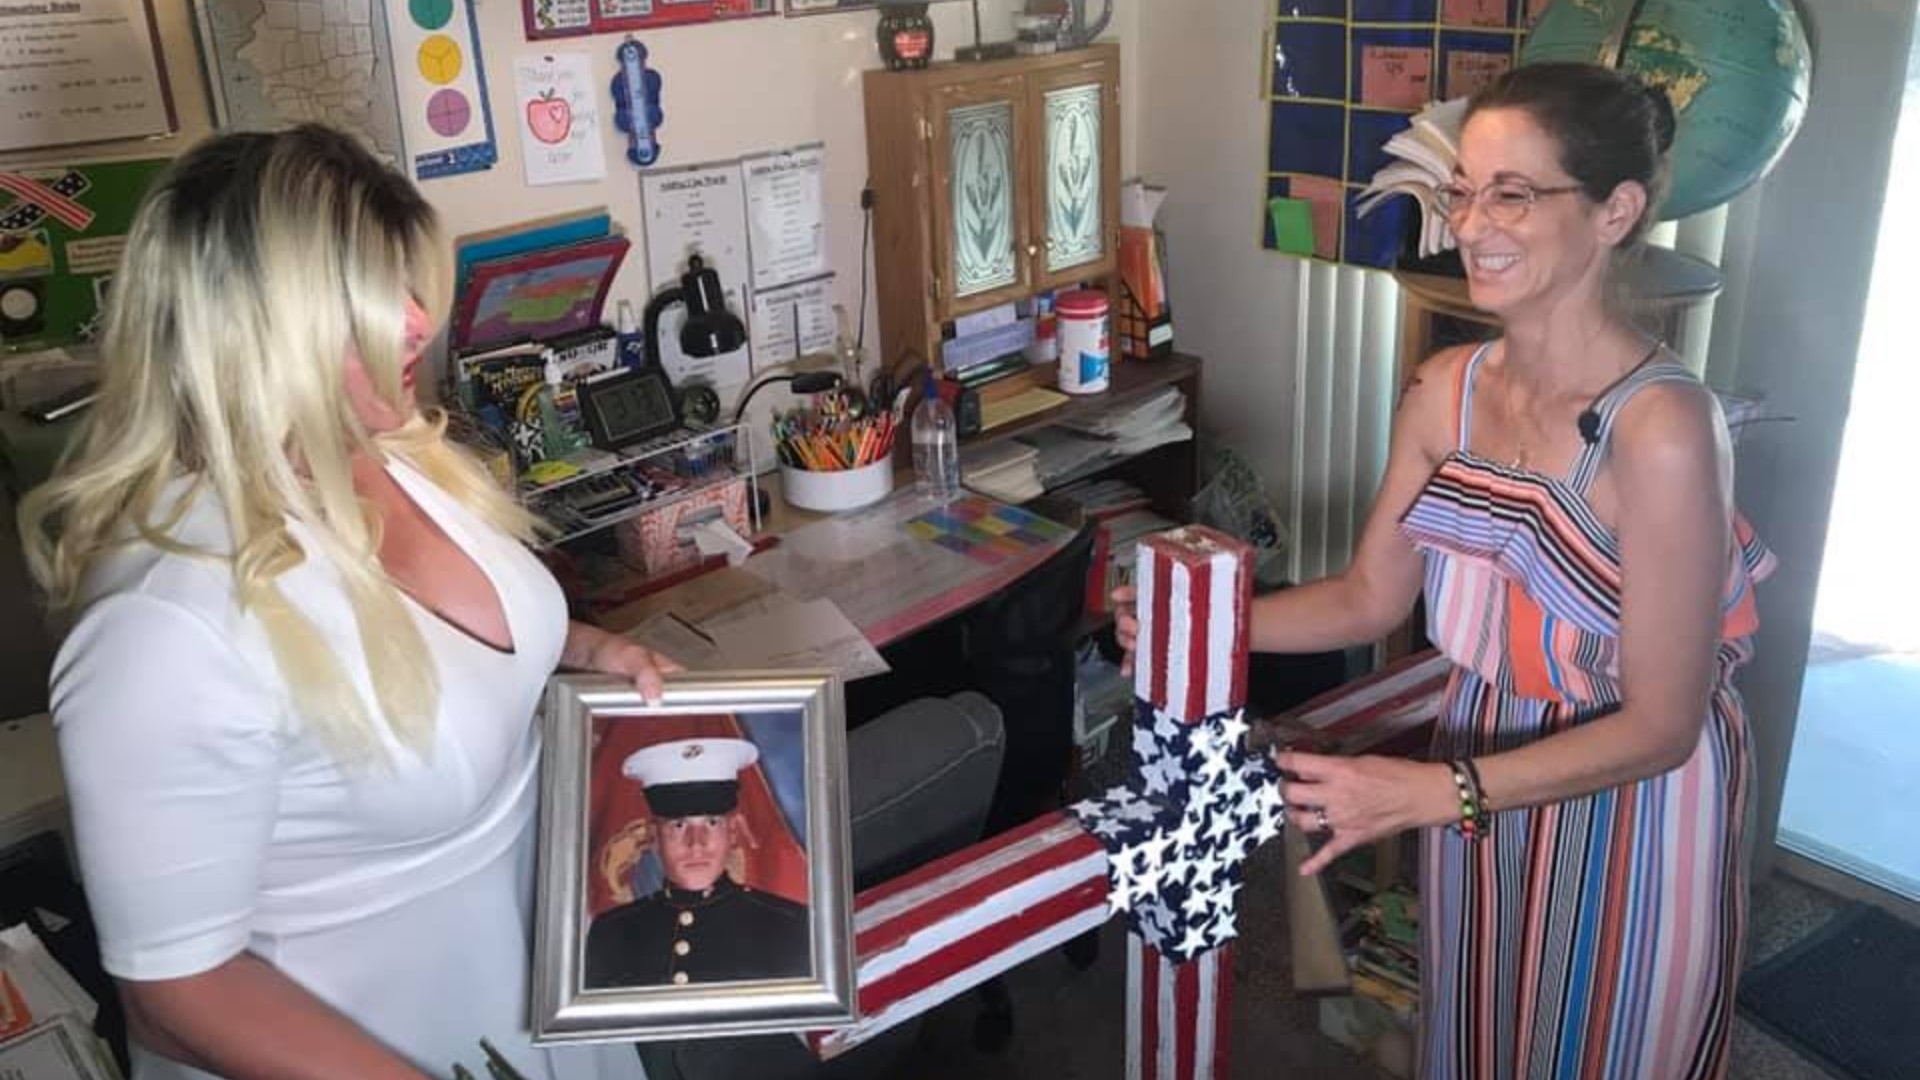 A memorial cross at-risk of being removed due to construction has been returned to the widow of a U.S. Marine veteran through the help of a community member.